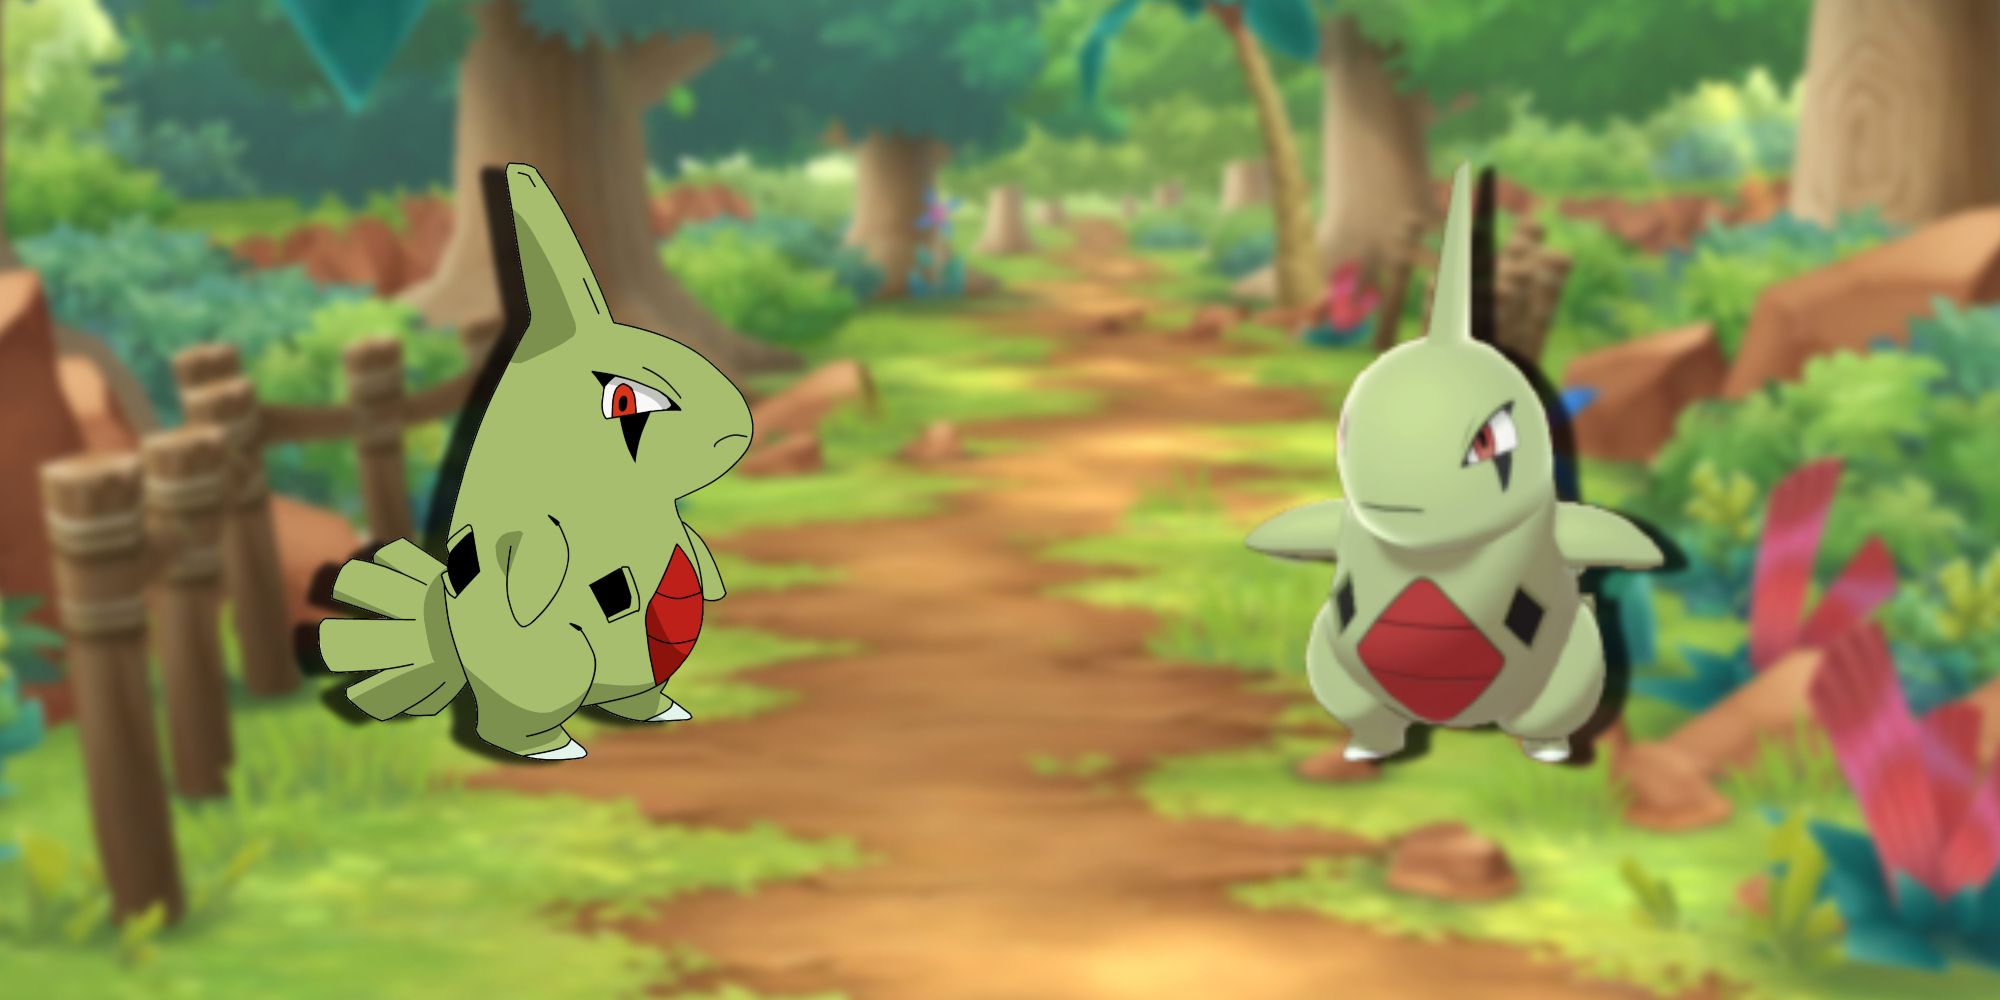 The pokemon Larvitar is cute but its powers could likely kill a human